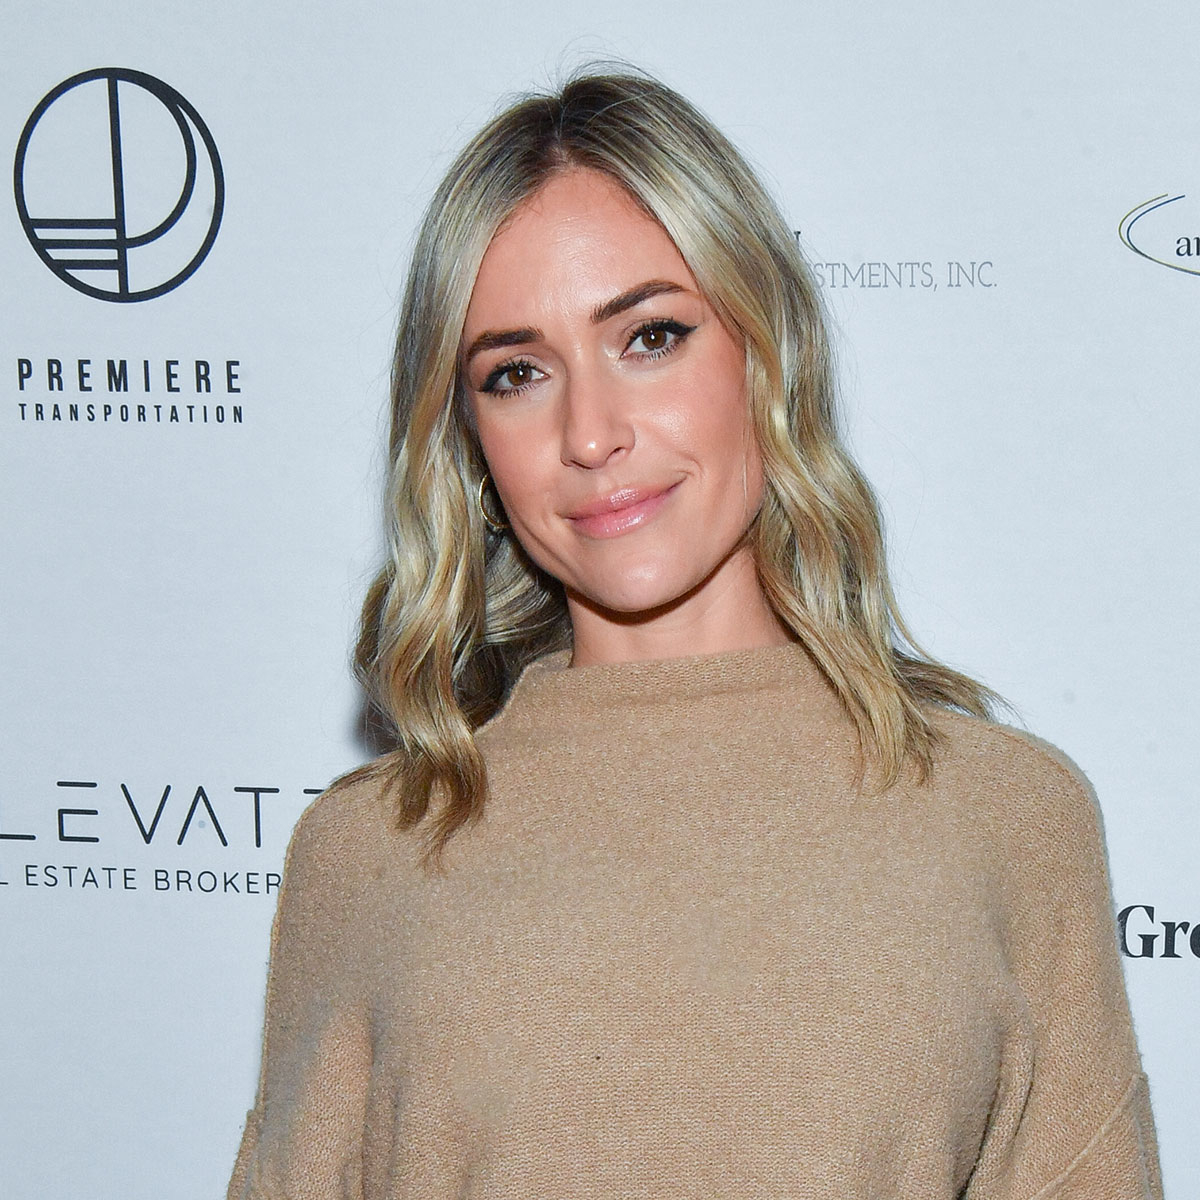 Kristin Cavallari Shares the Signs She Receives From Her Brother 8 Years After His Death